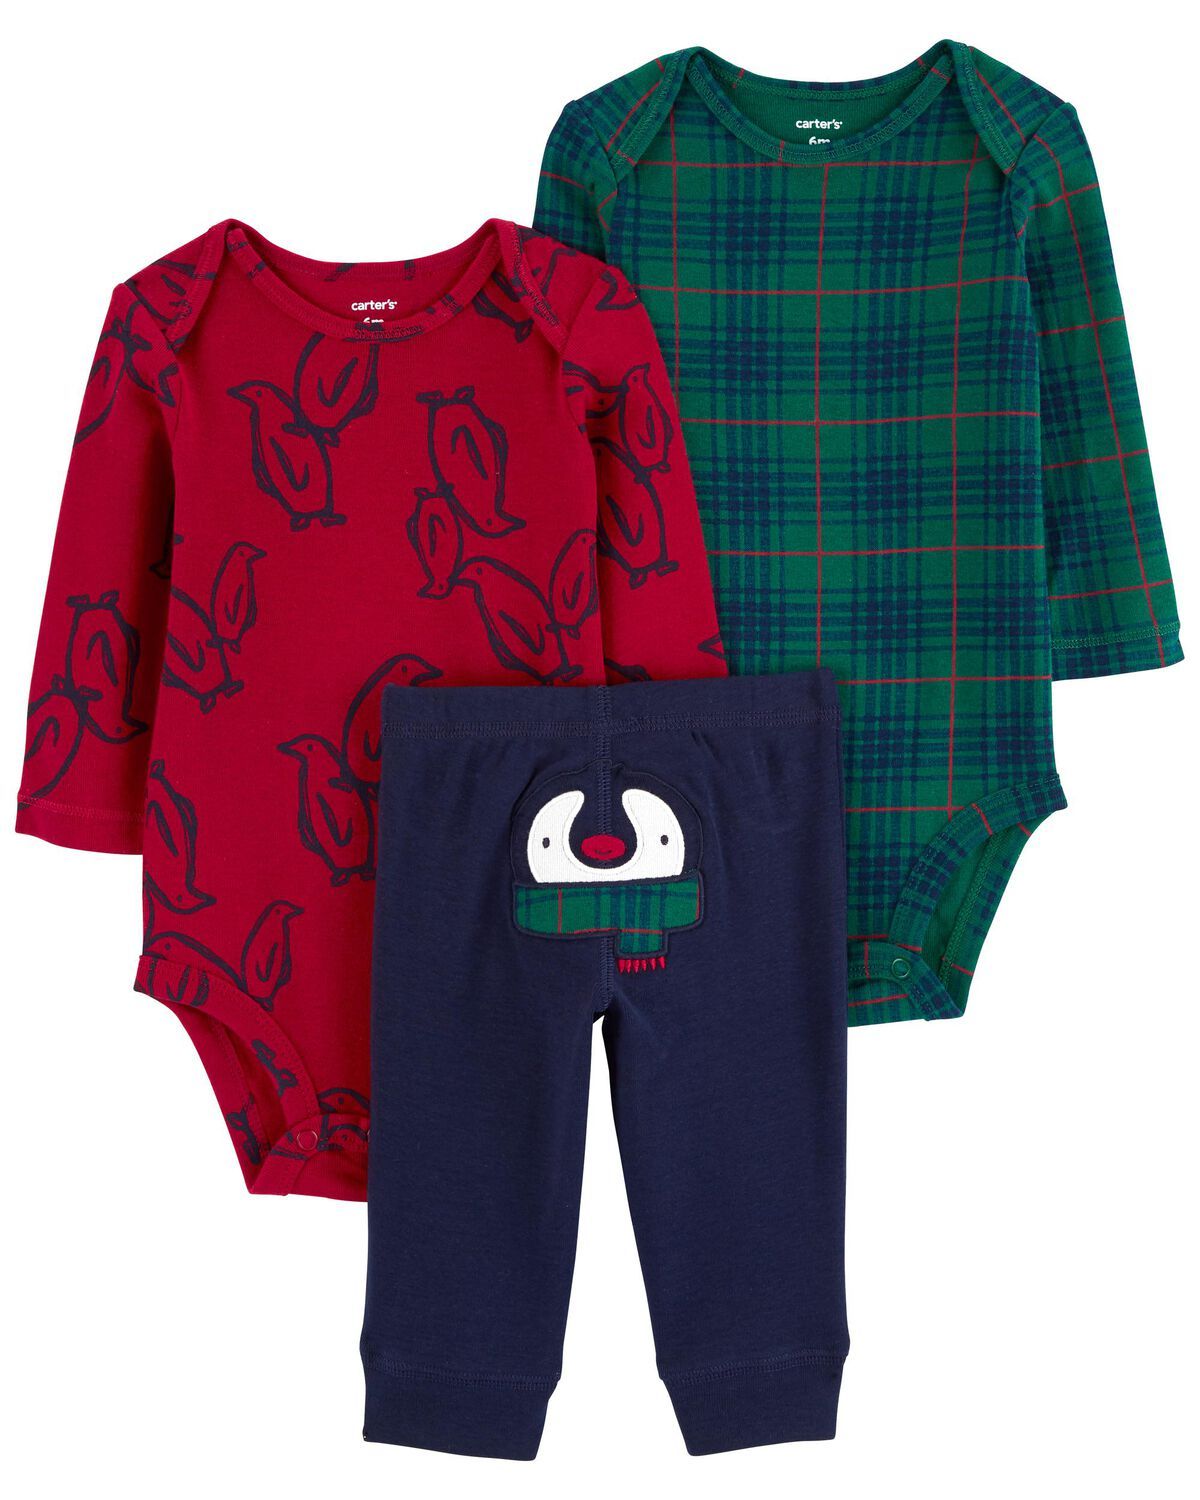 Navy/Red Baby 3-Piece Holiday Little Character Set | carters.com | Carter's